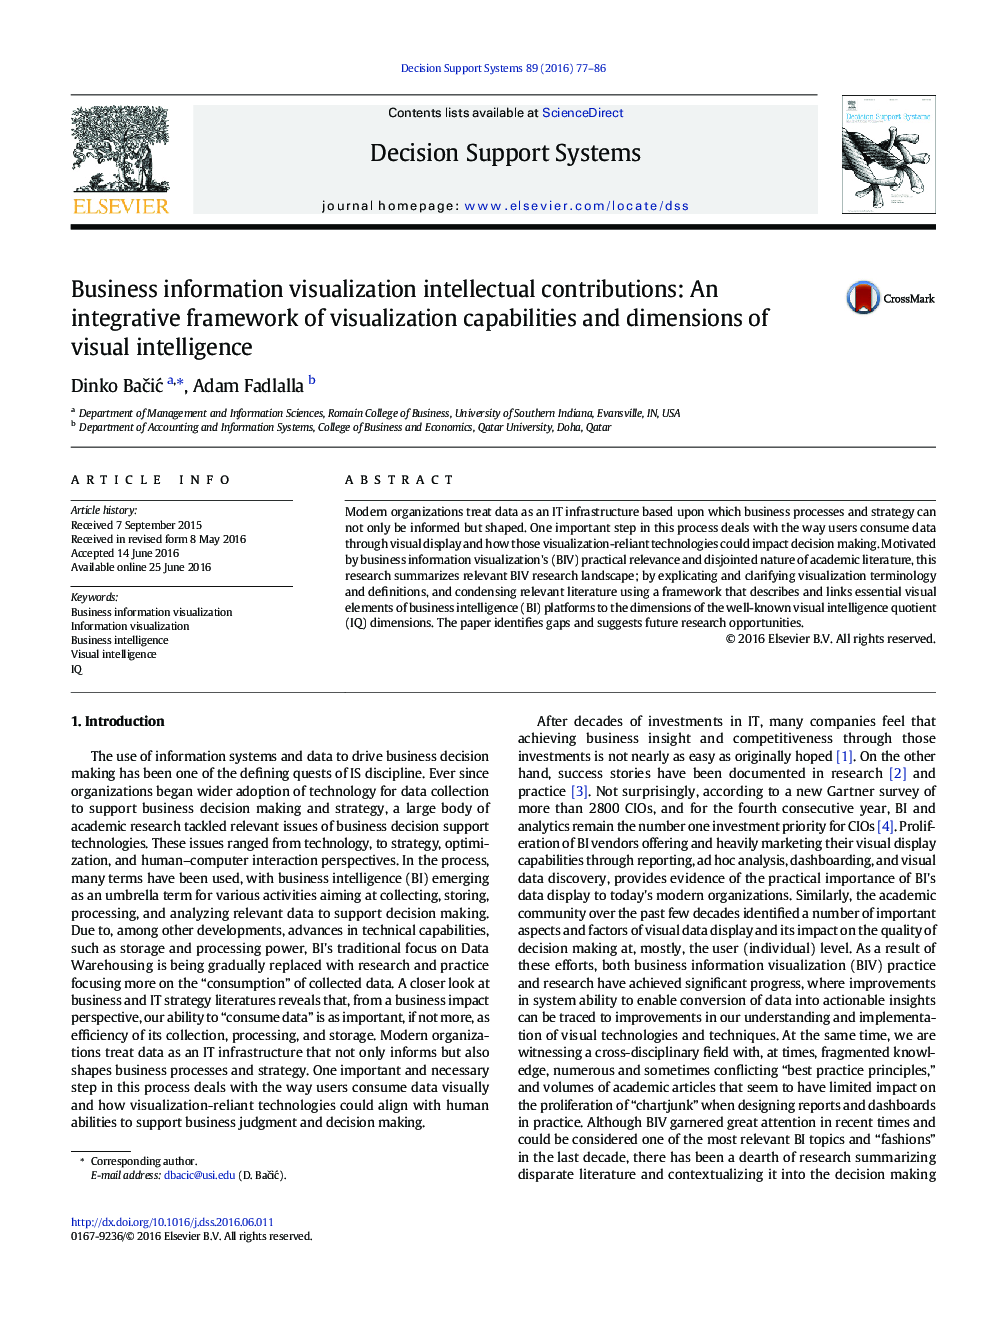 Business information visualization intellectual contributions: An integrative framework of visualization capabilities and dimensions of visual intelligence